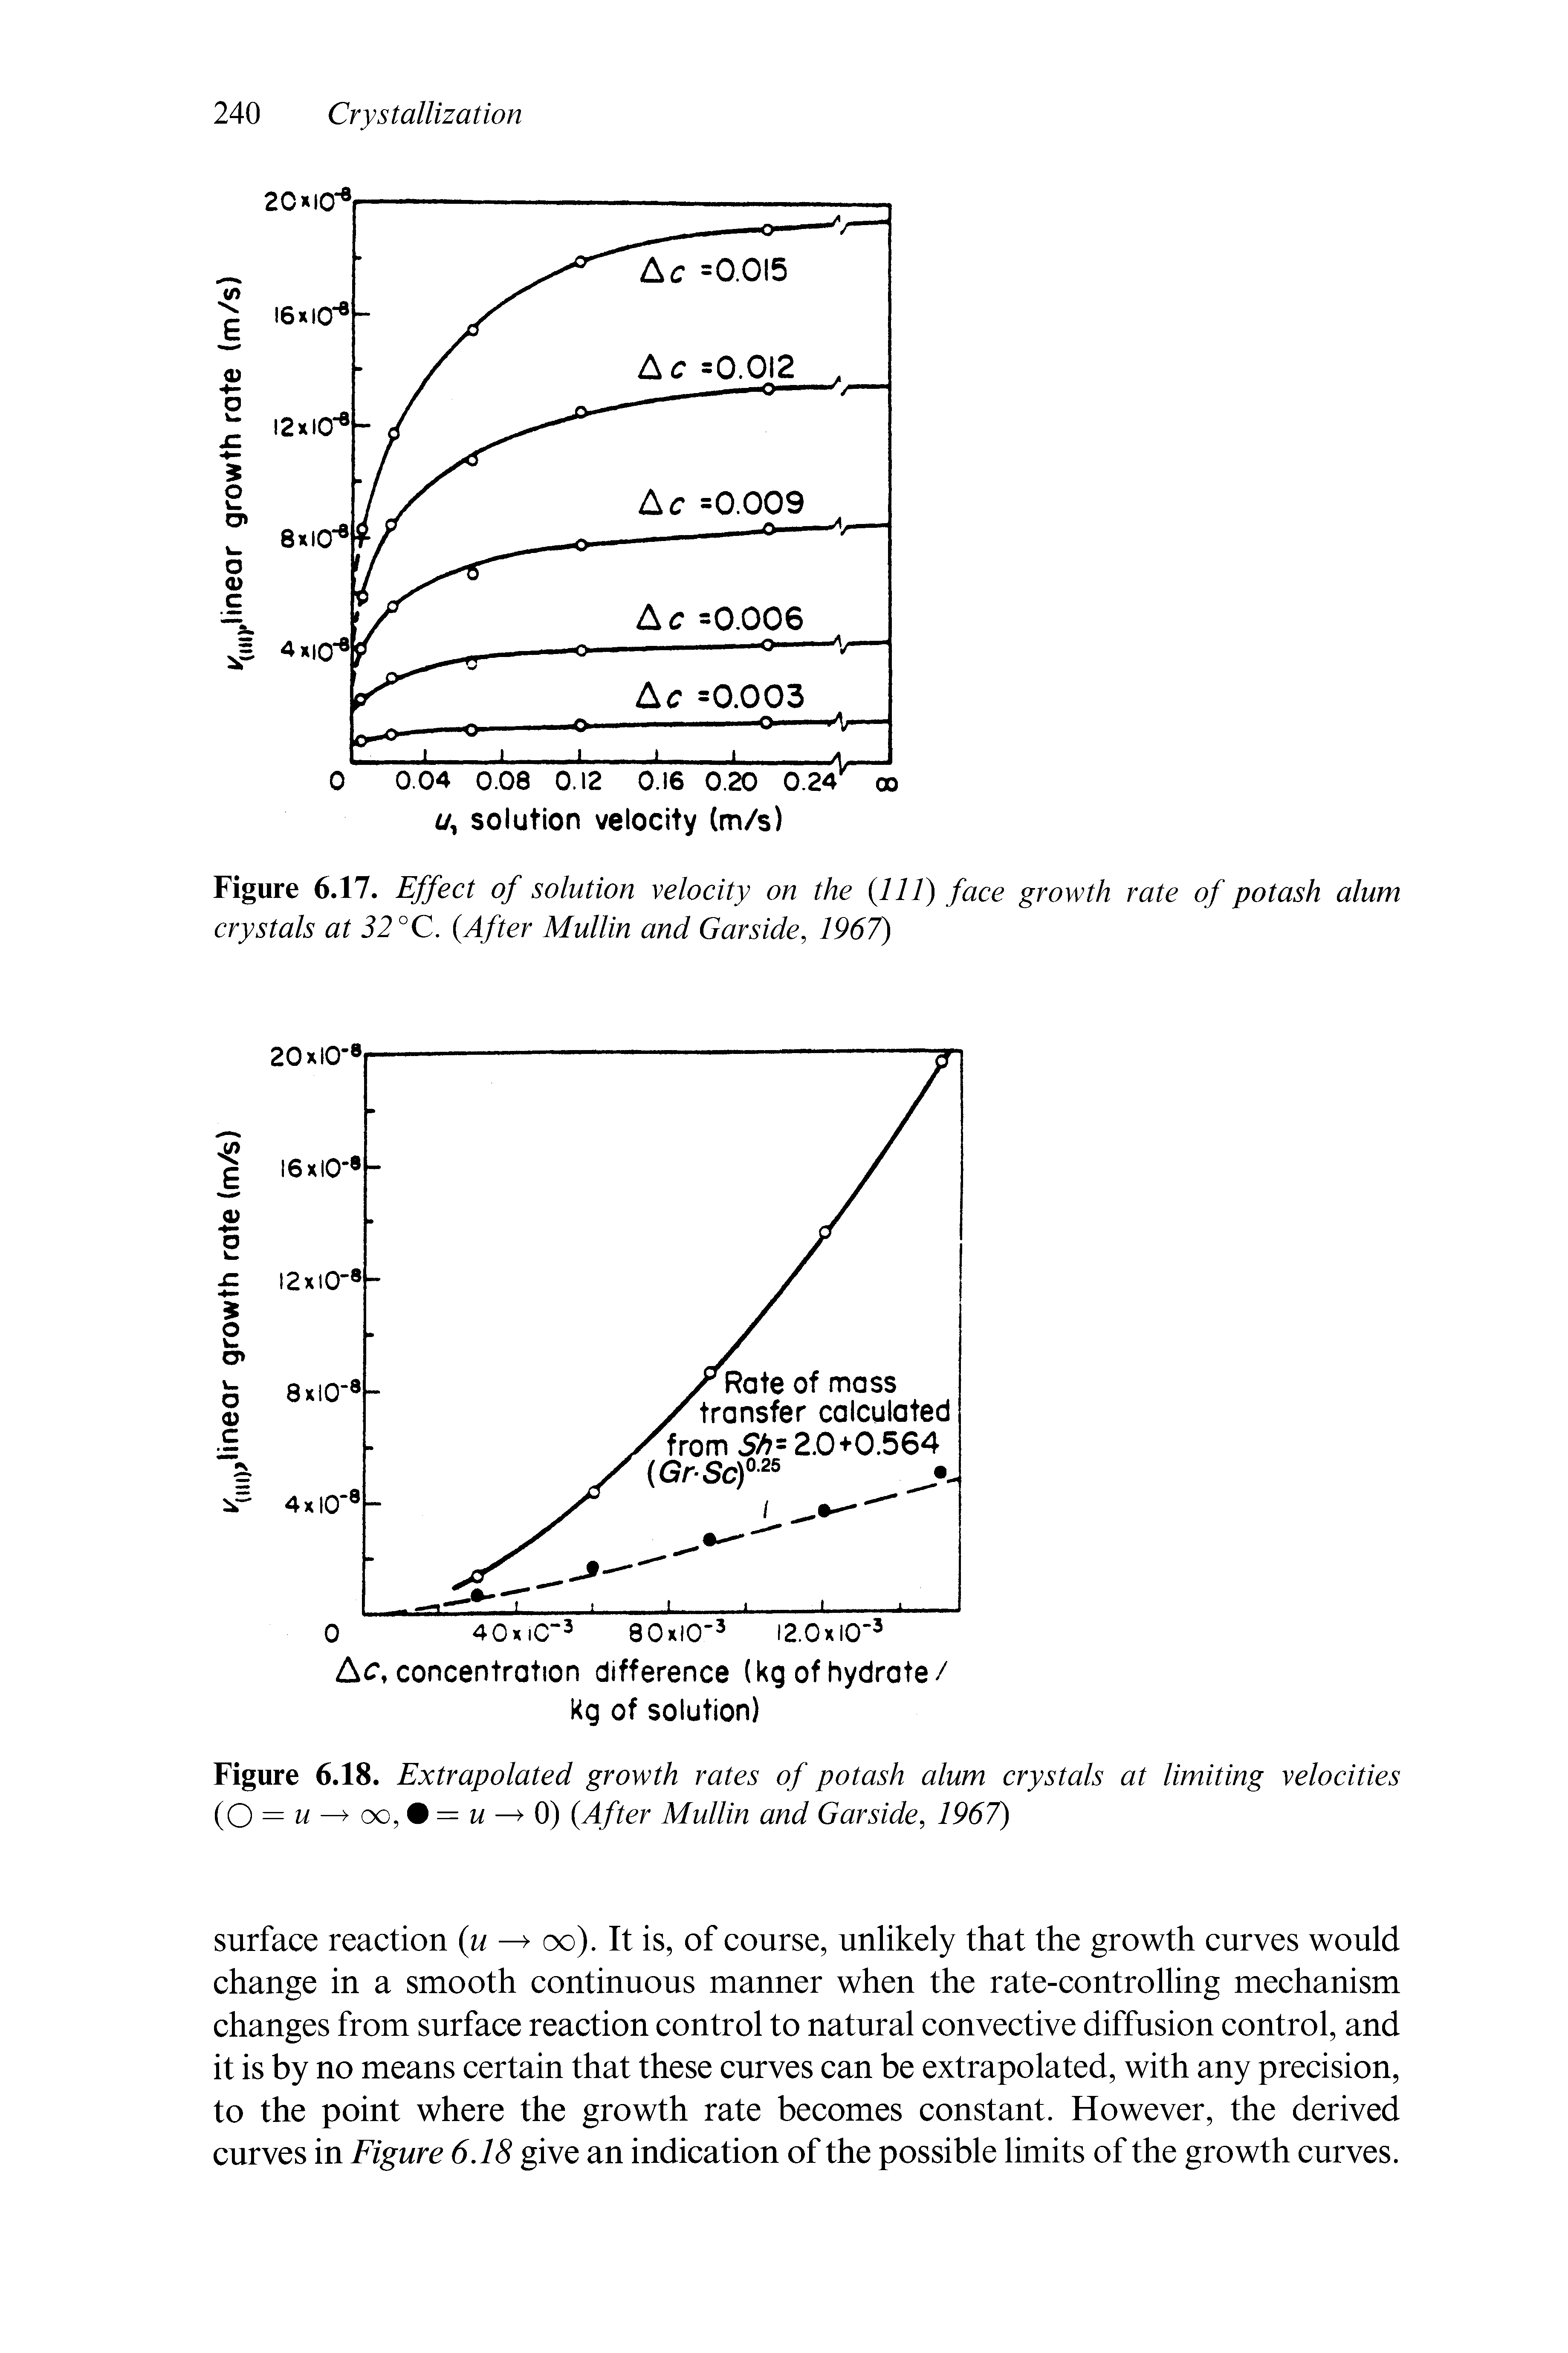 Figure 6.17. Effect of solution velocity on the 111) face growth rate of potash alum crystals at 32 °C. After Mullin and Garside, 1967)...